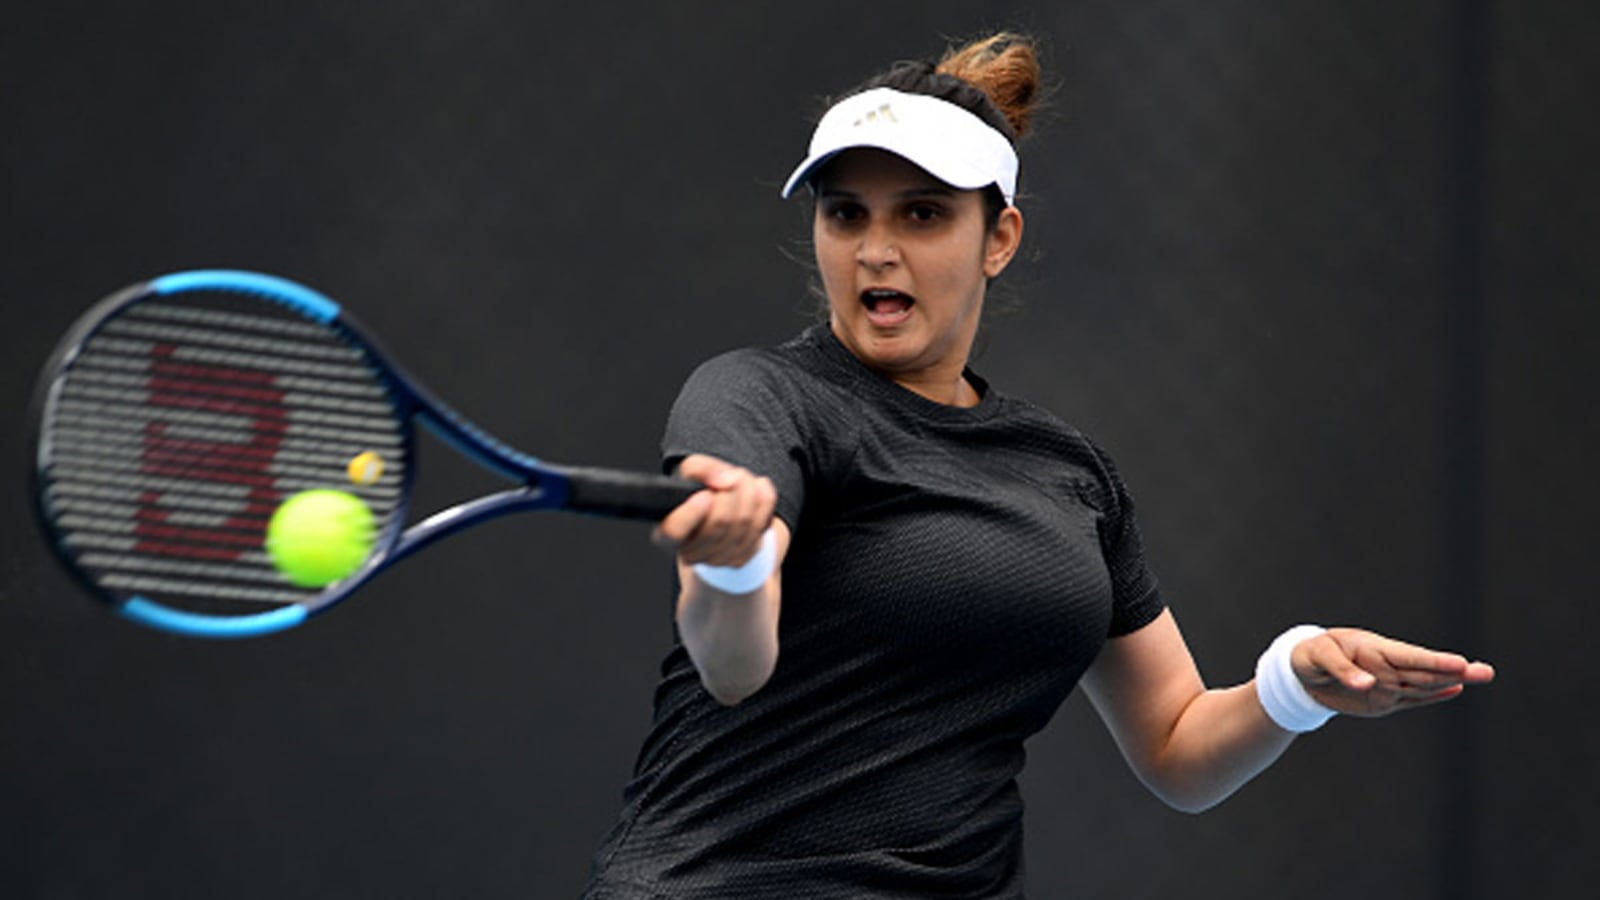 Sania Bf Xx Video - For Sania Mirza, belief to take on the best is what matters most | Tennis  News - Hindustan Times